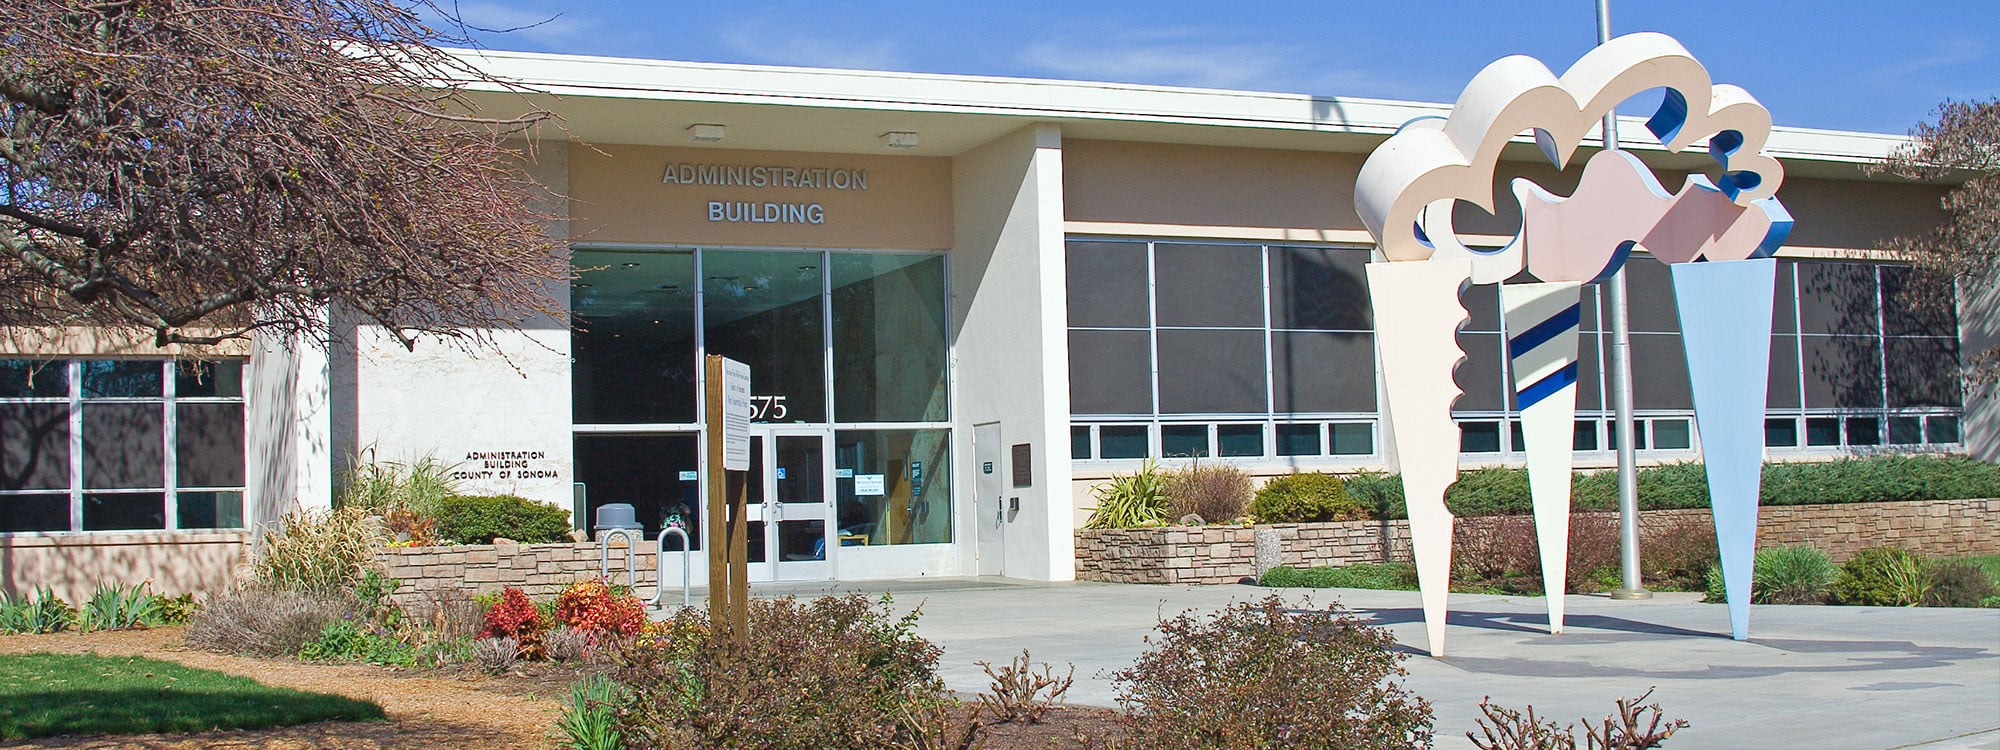 The current Sonoma County Civic Center at 575 Administration Way.